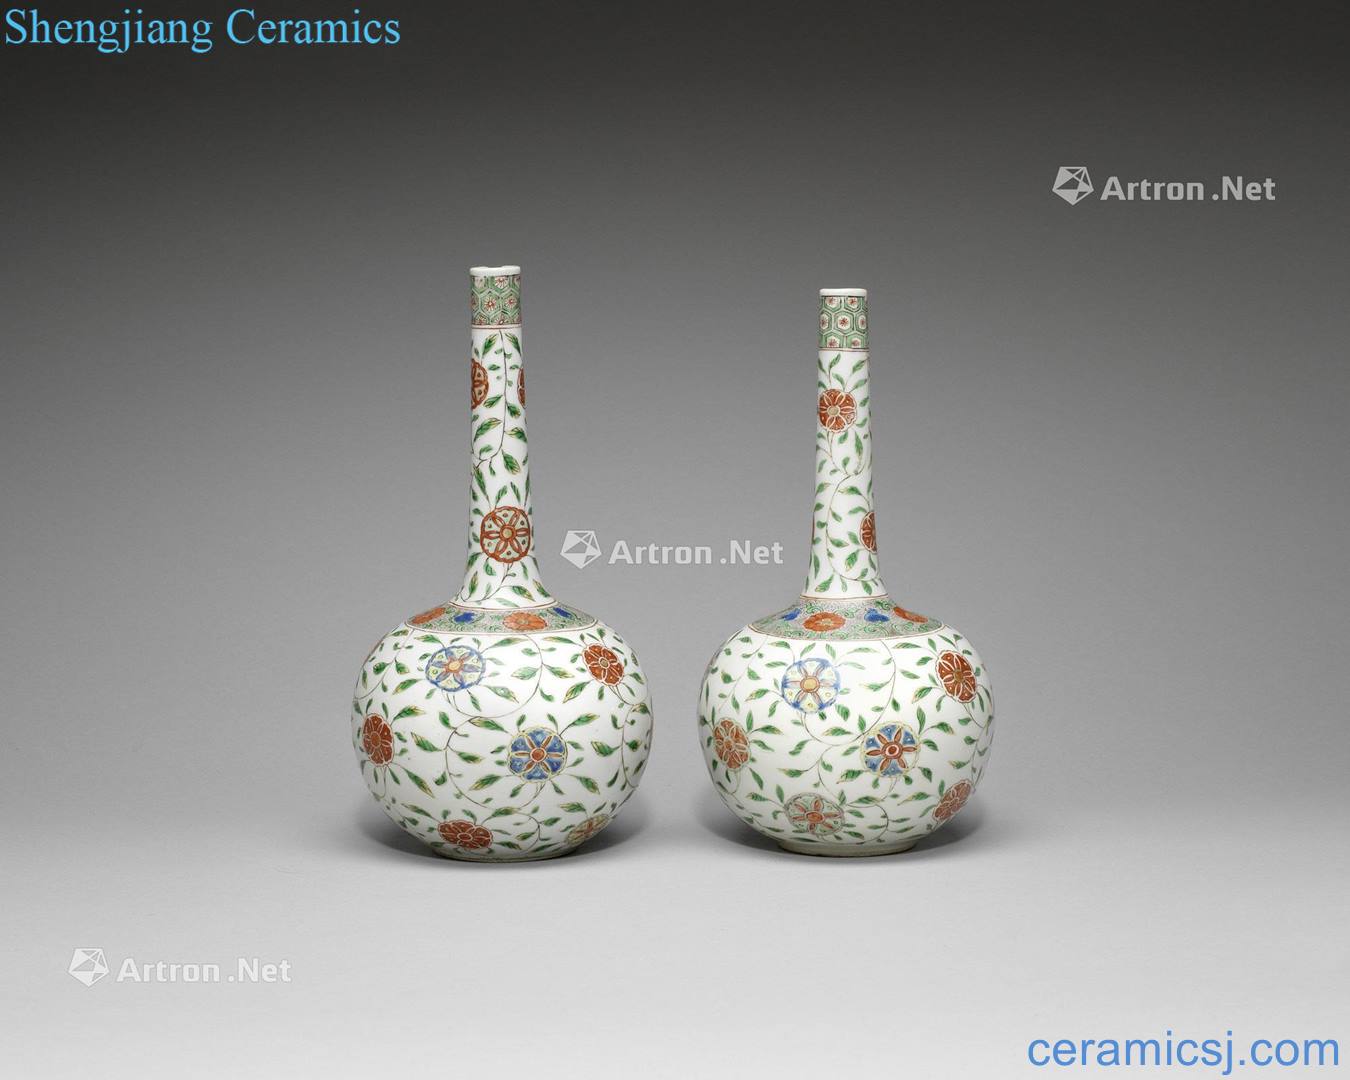 The qing emperor kangxi colorful cloud pattern flask (a set of two)